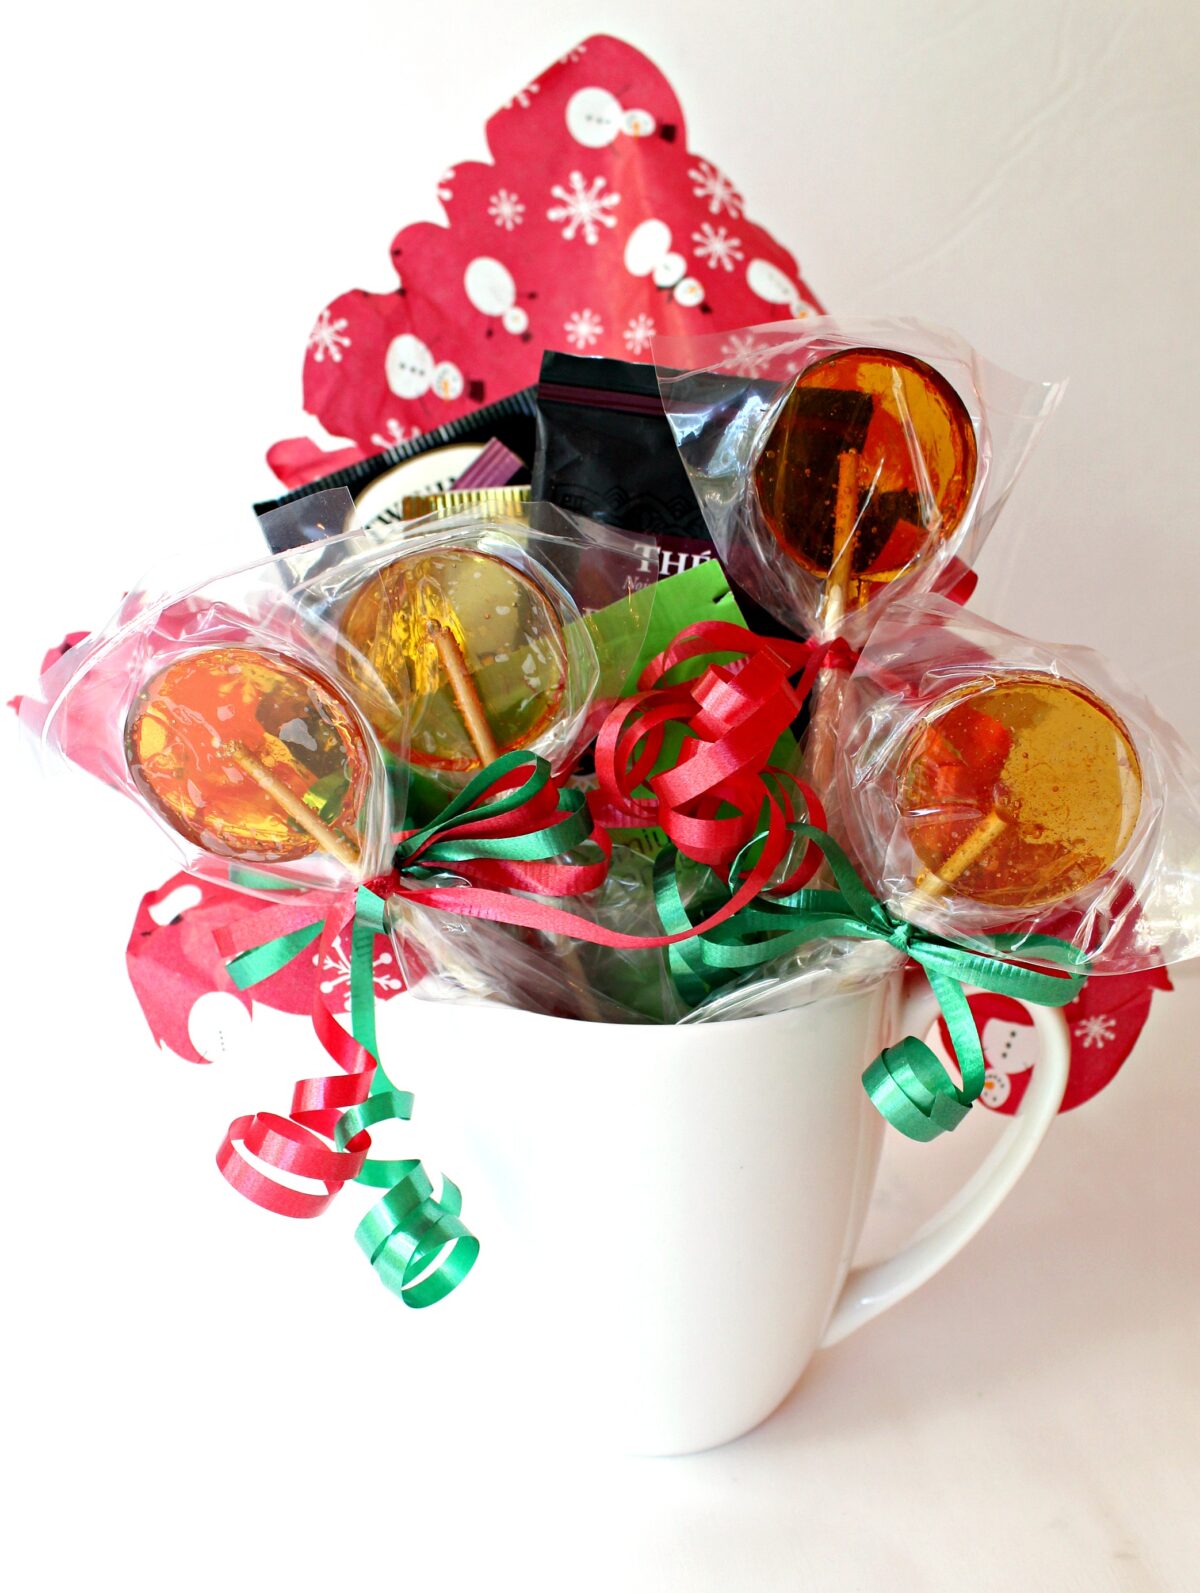 Lollipops with red and green ribbons in a white mug with tea bags for gift giving.